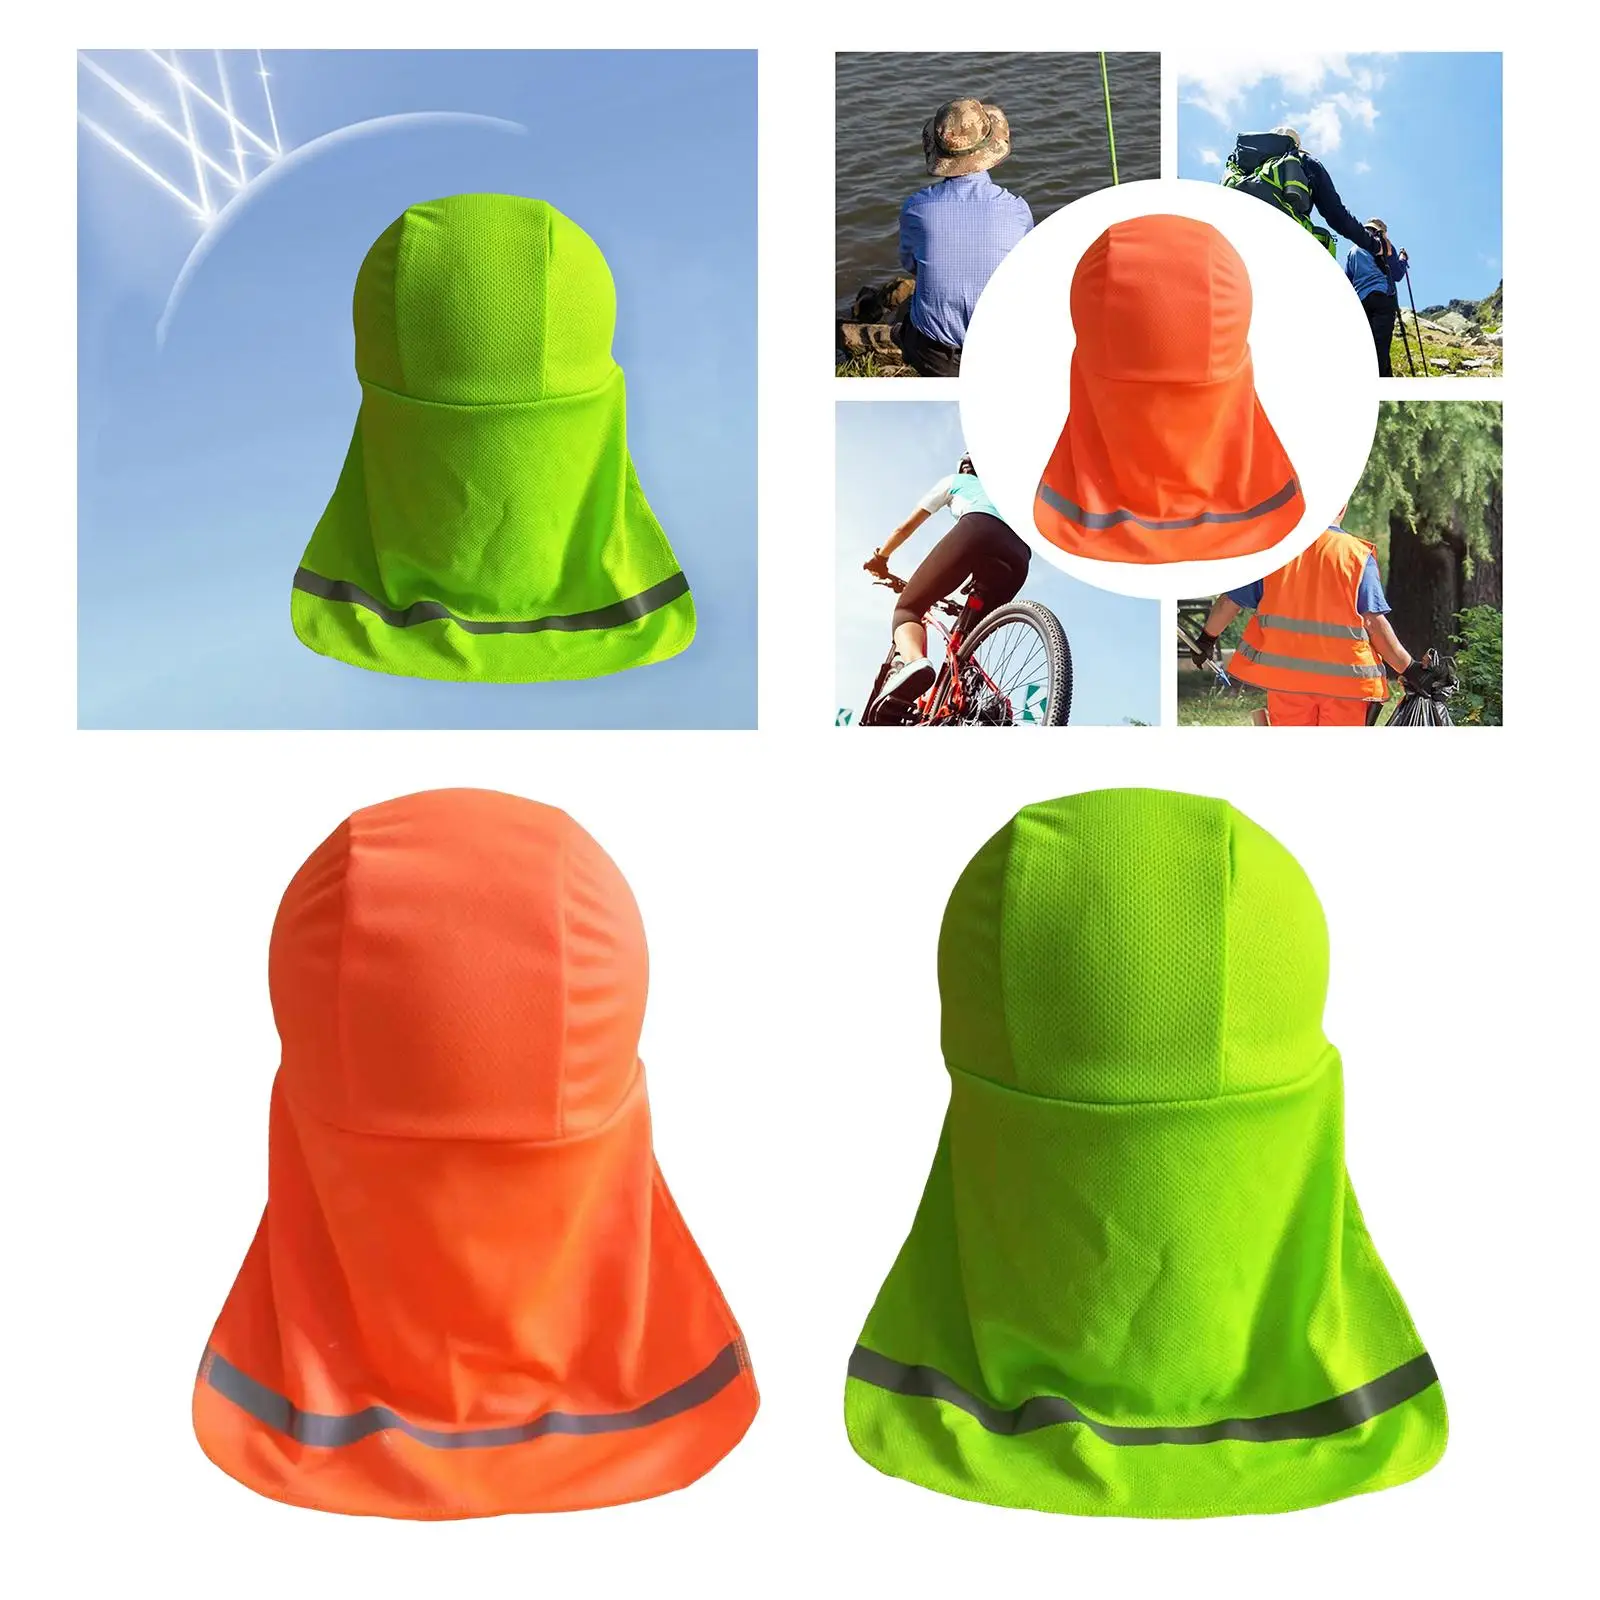 Shade Hat Cooling Sun Protection Breathable Headband Headwrap Hard Hat Liner for Adults Women Men Outdoor Activities Fishing